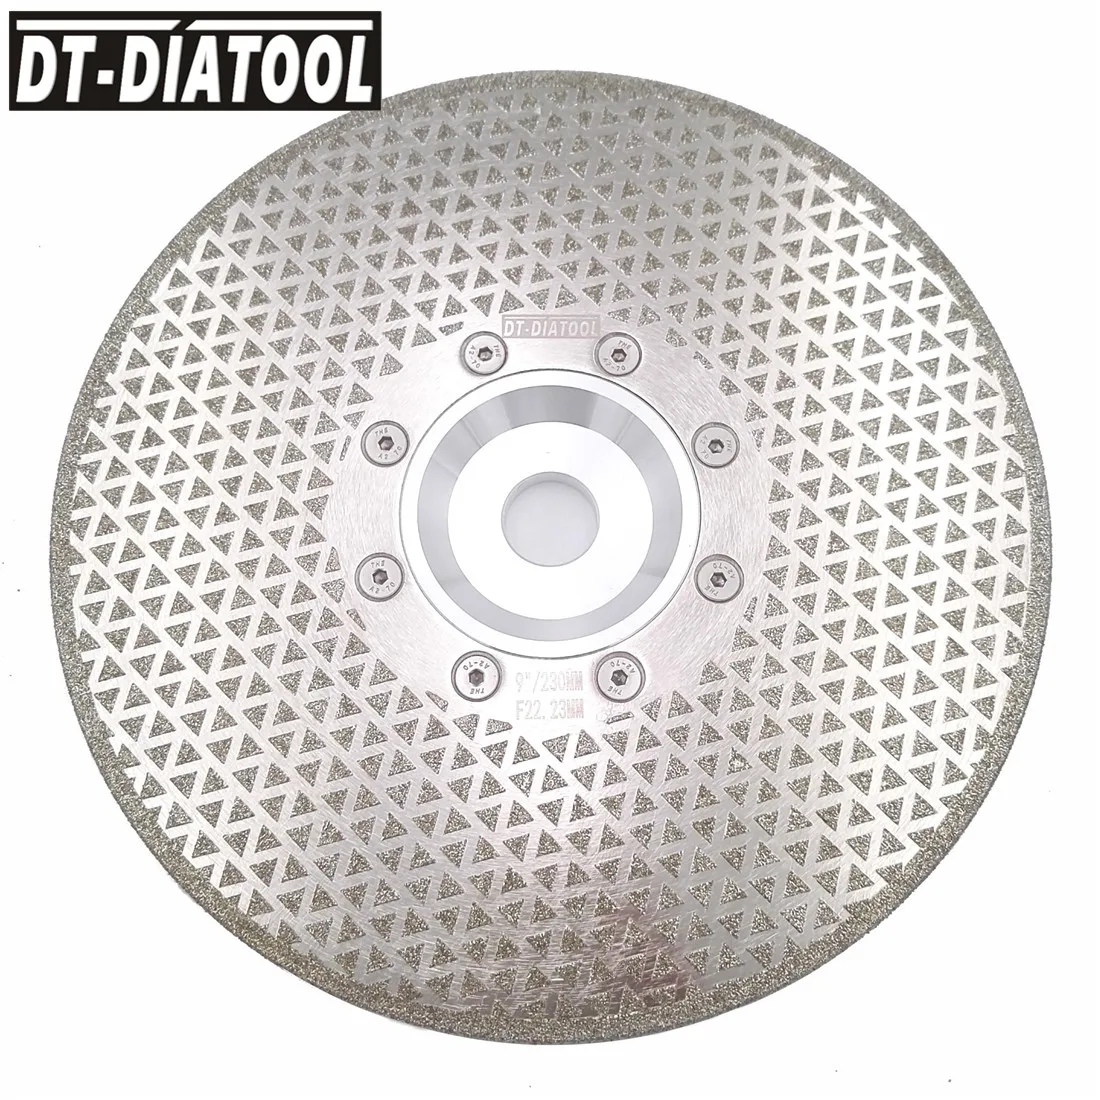 

DT-DIATOOL 1pc 9"/230mm Both Side Electroplated Coated Diamond Cutting & Grinding Discs 22.23mm Flange Granite Marble Saw Blade